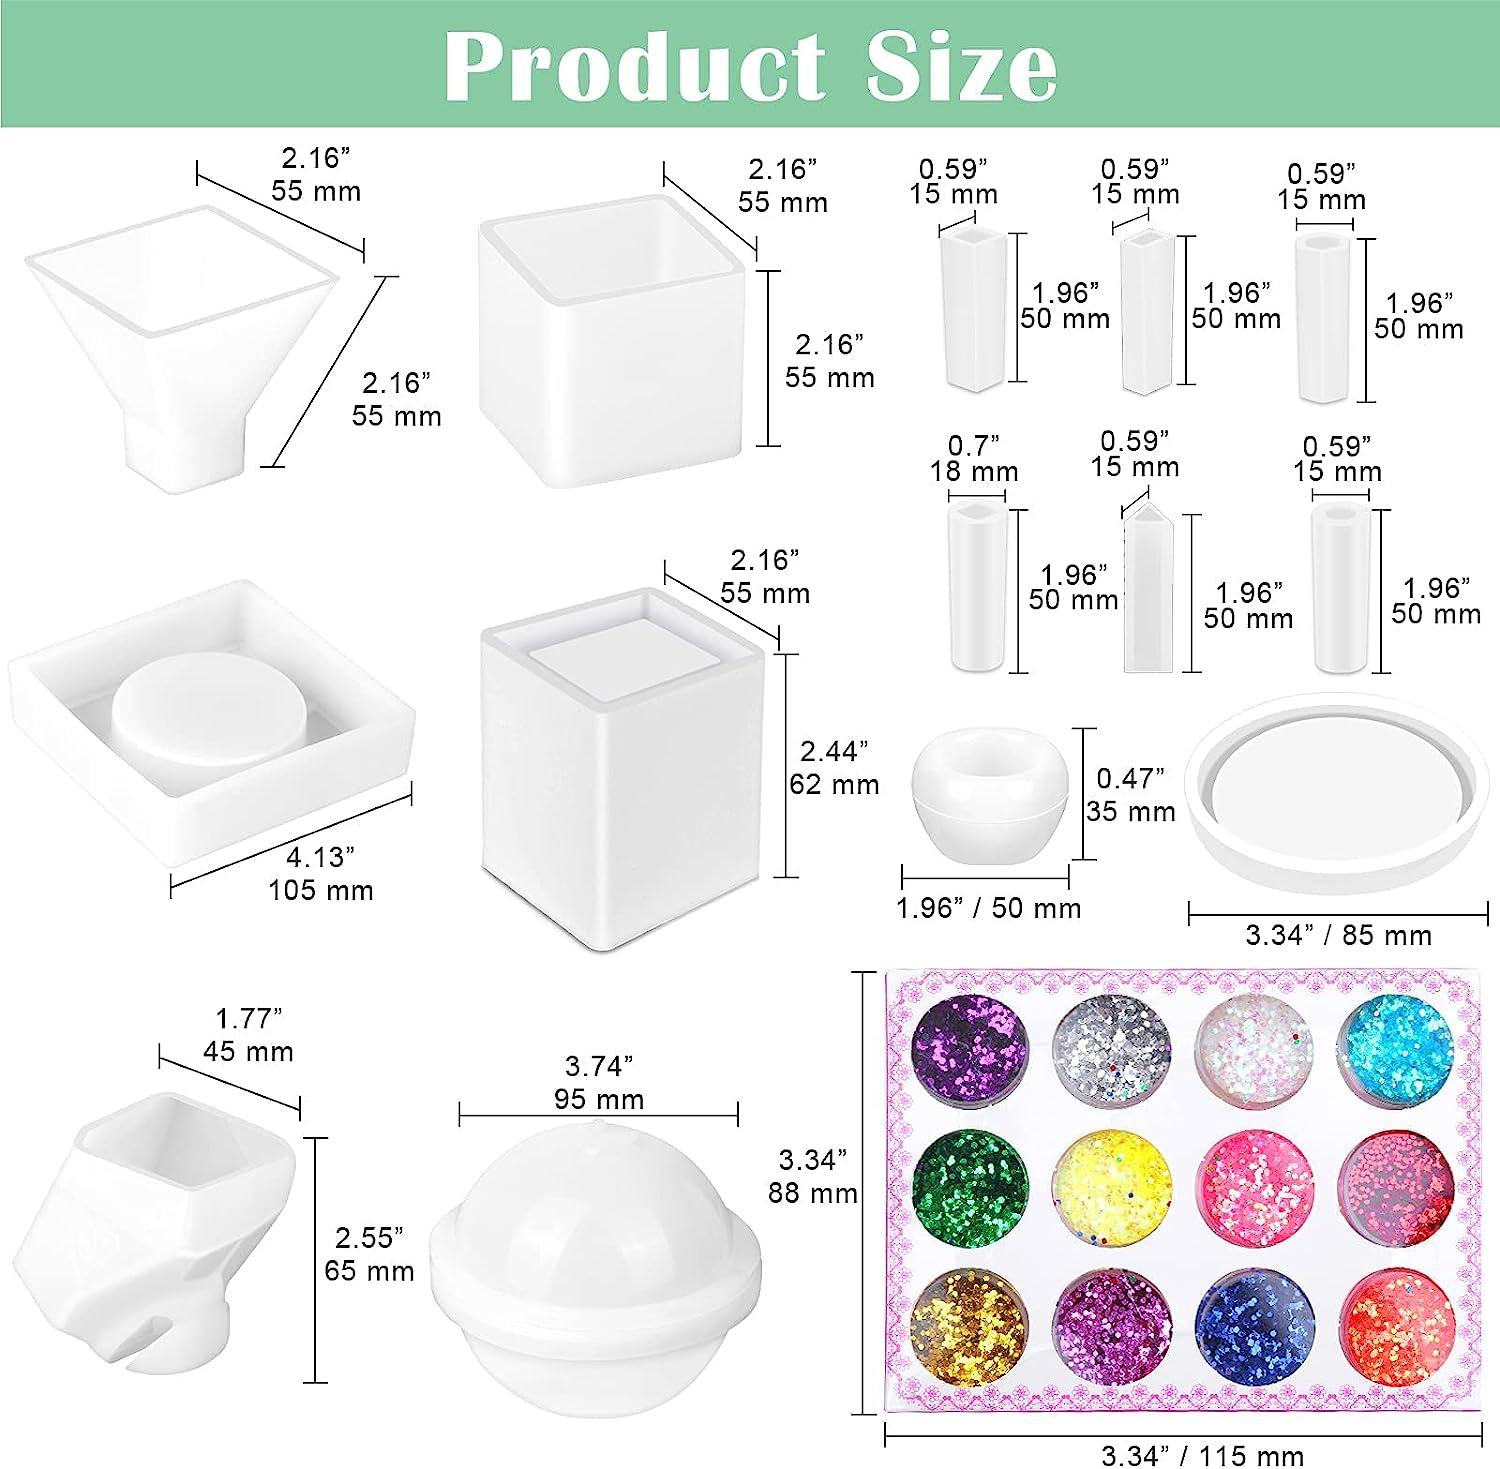 Square Mold, Large Silicone Mold For Resin, 5 inches - 1 piece